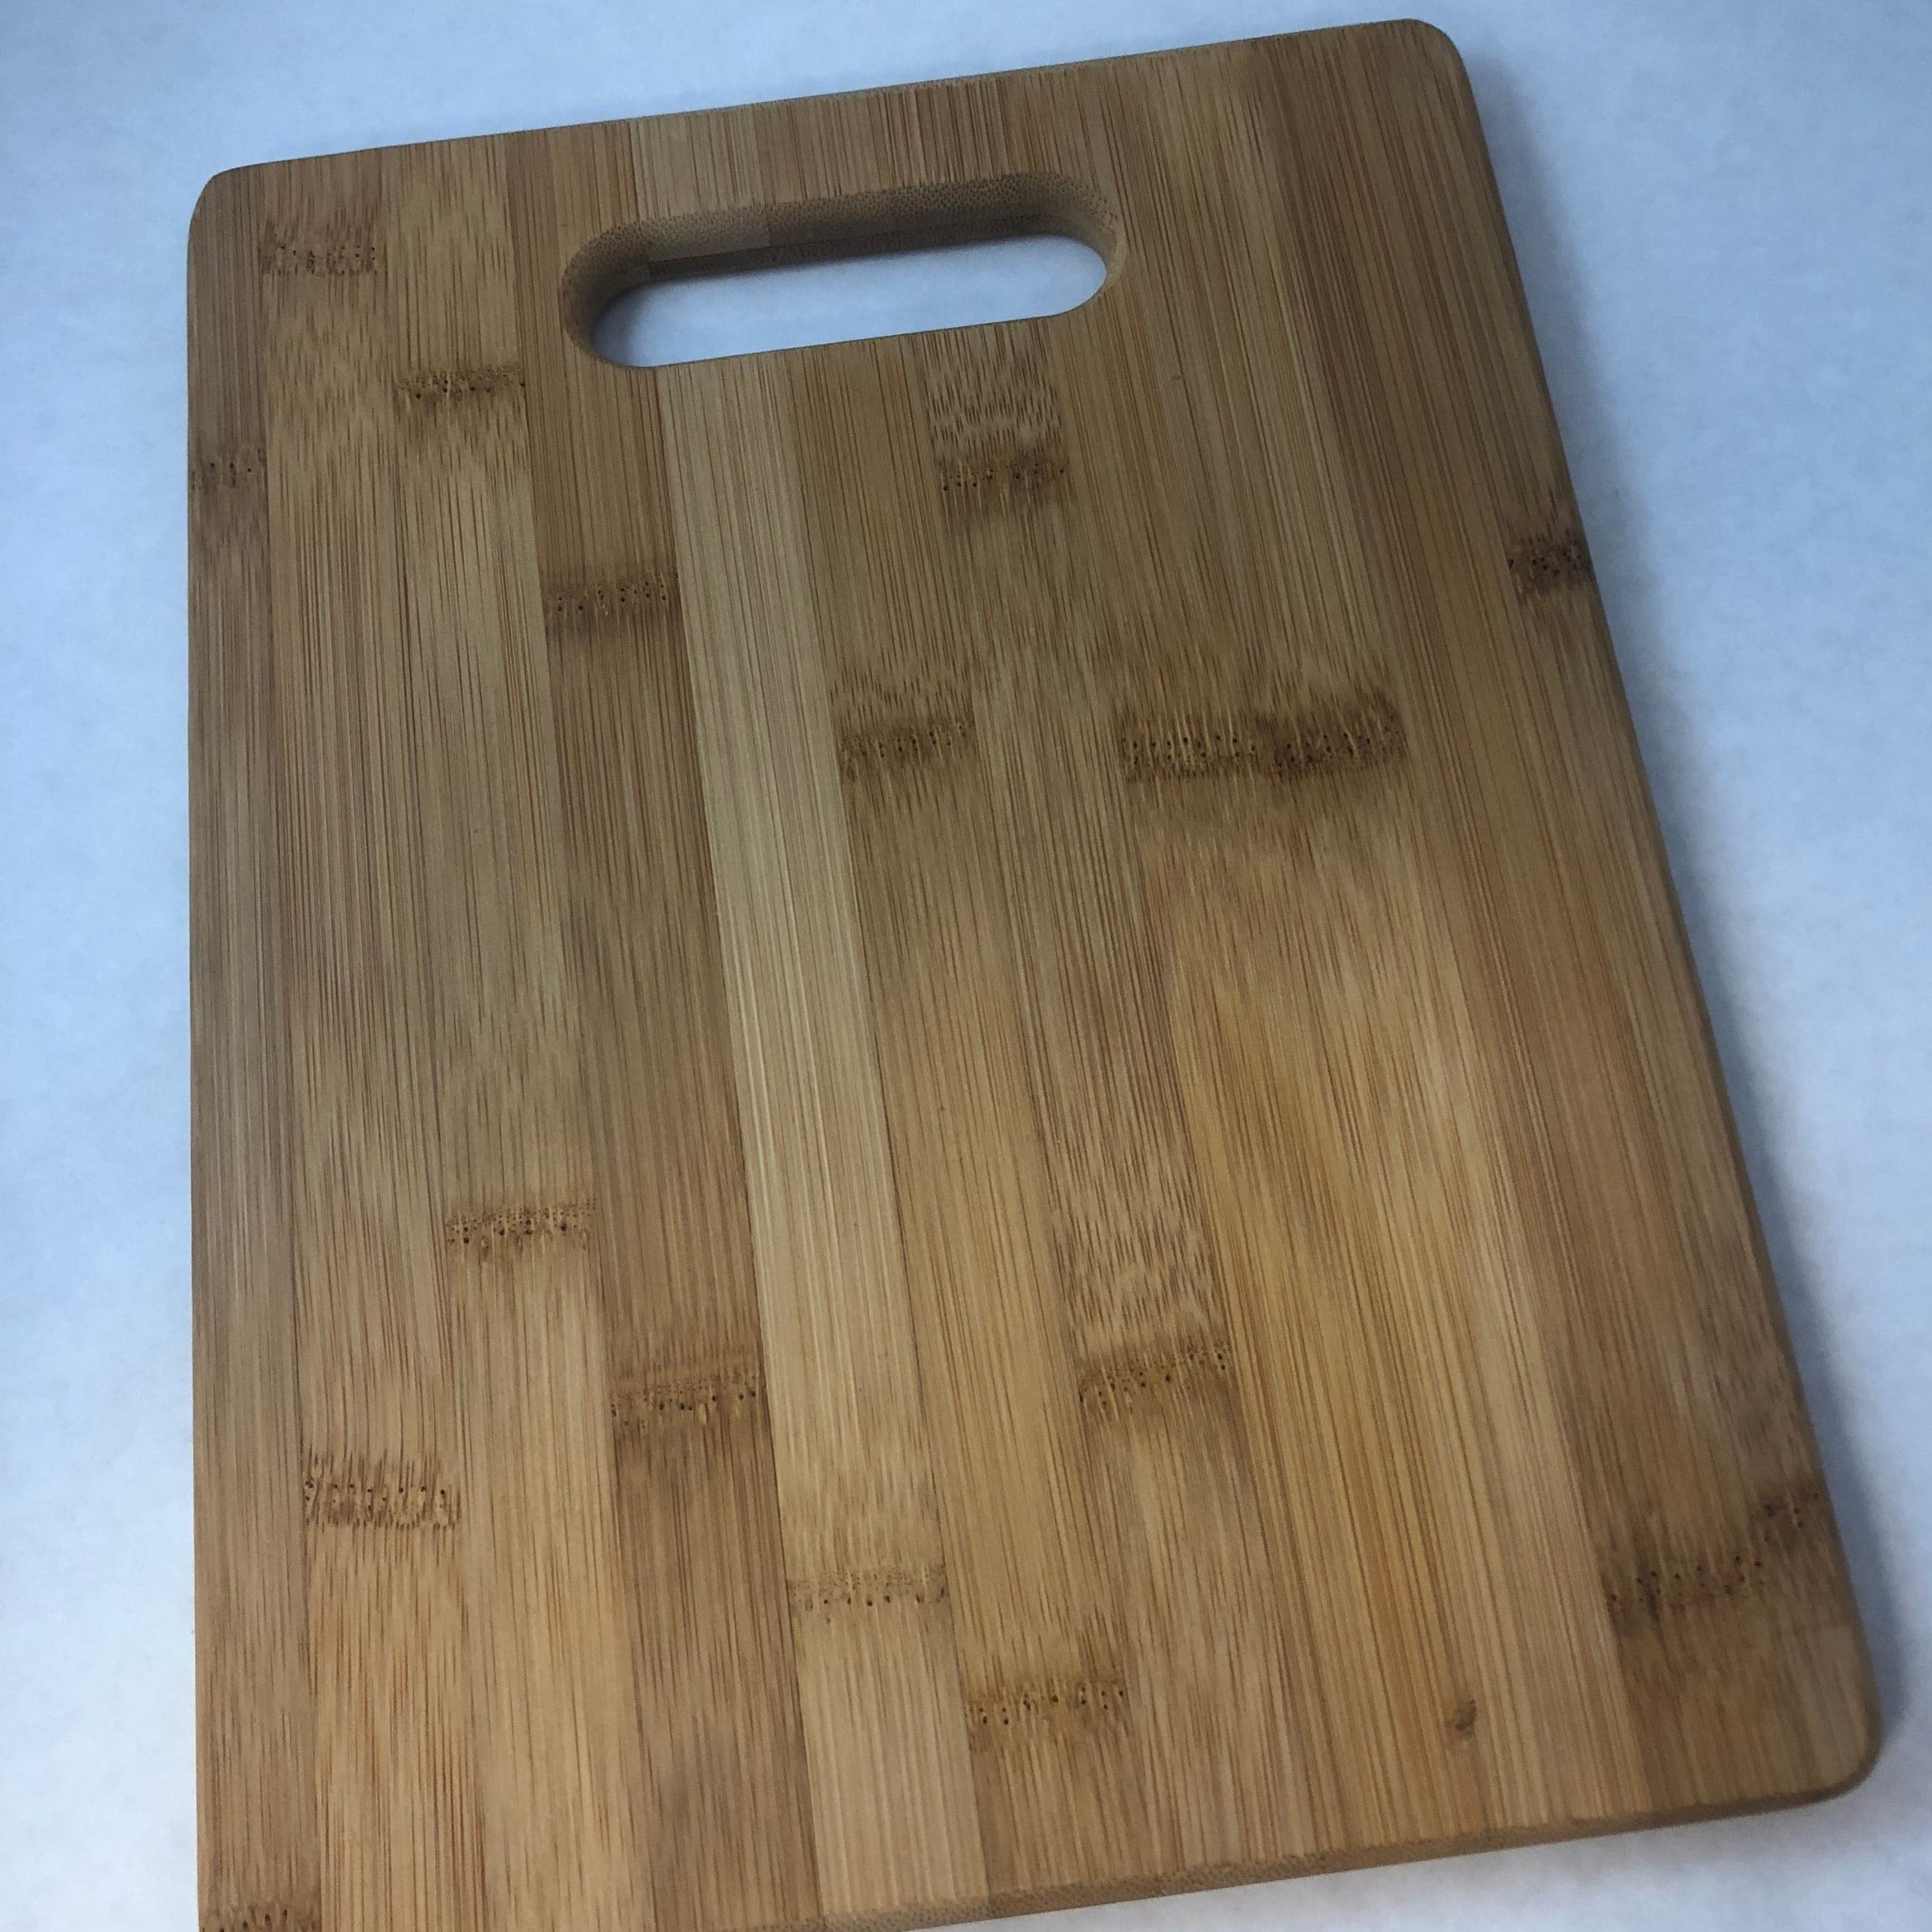 We Love You Mom Mothers Day Bamboo Paddle Cutting Board - 904 Custom